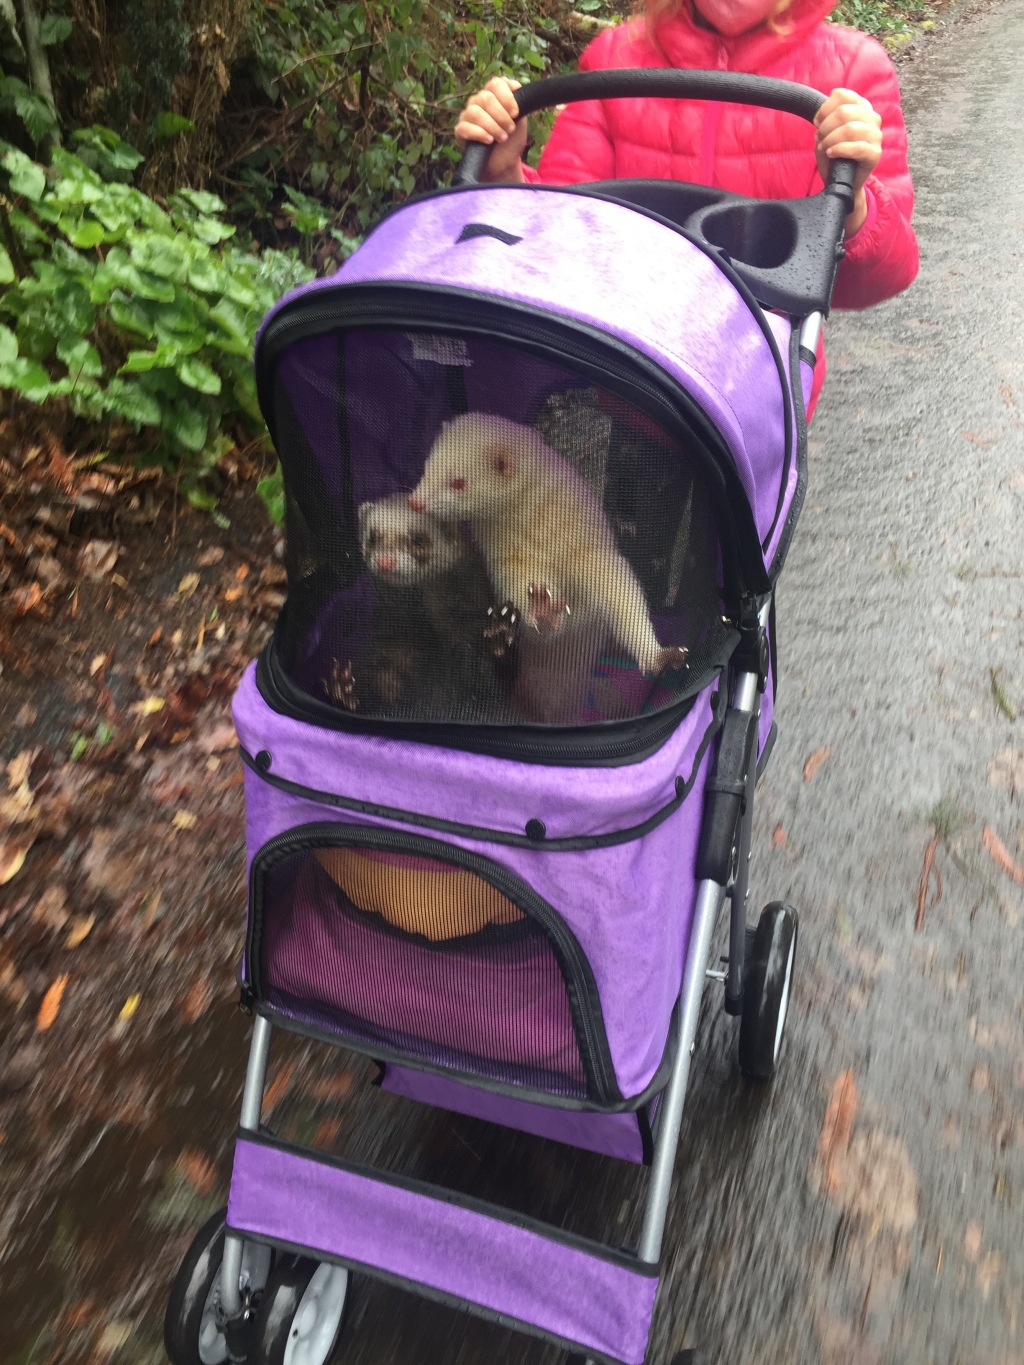 Paws and Pals Pet Stroller in purple lavender with two ferrets riding inside